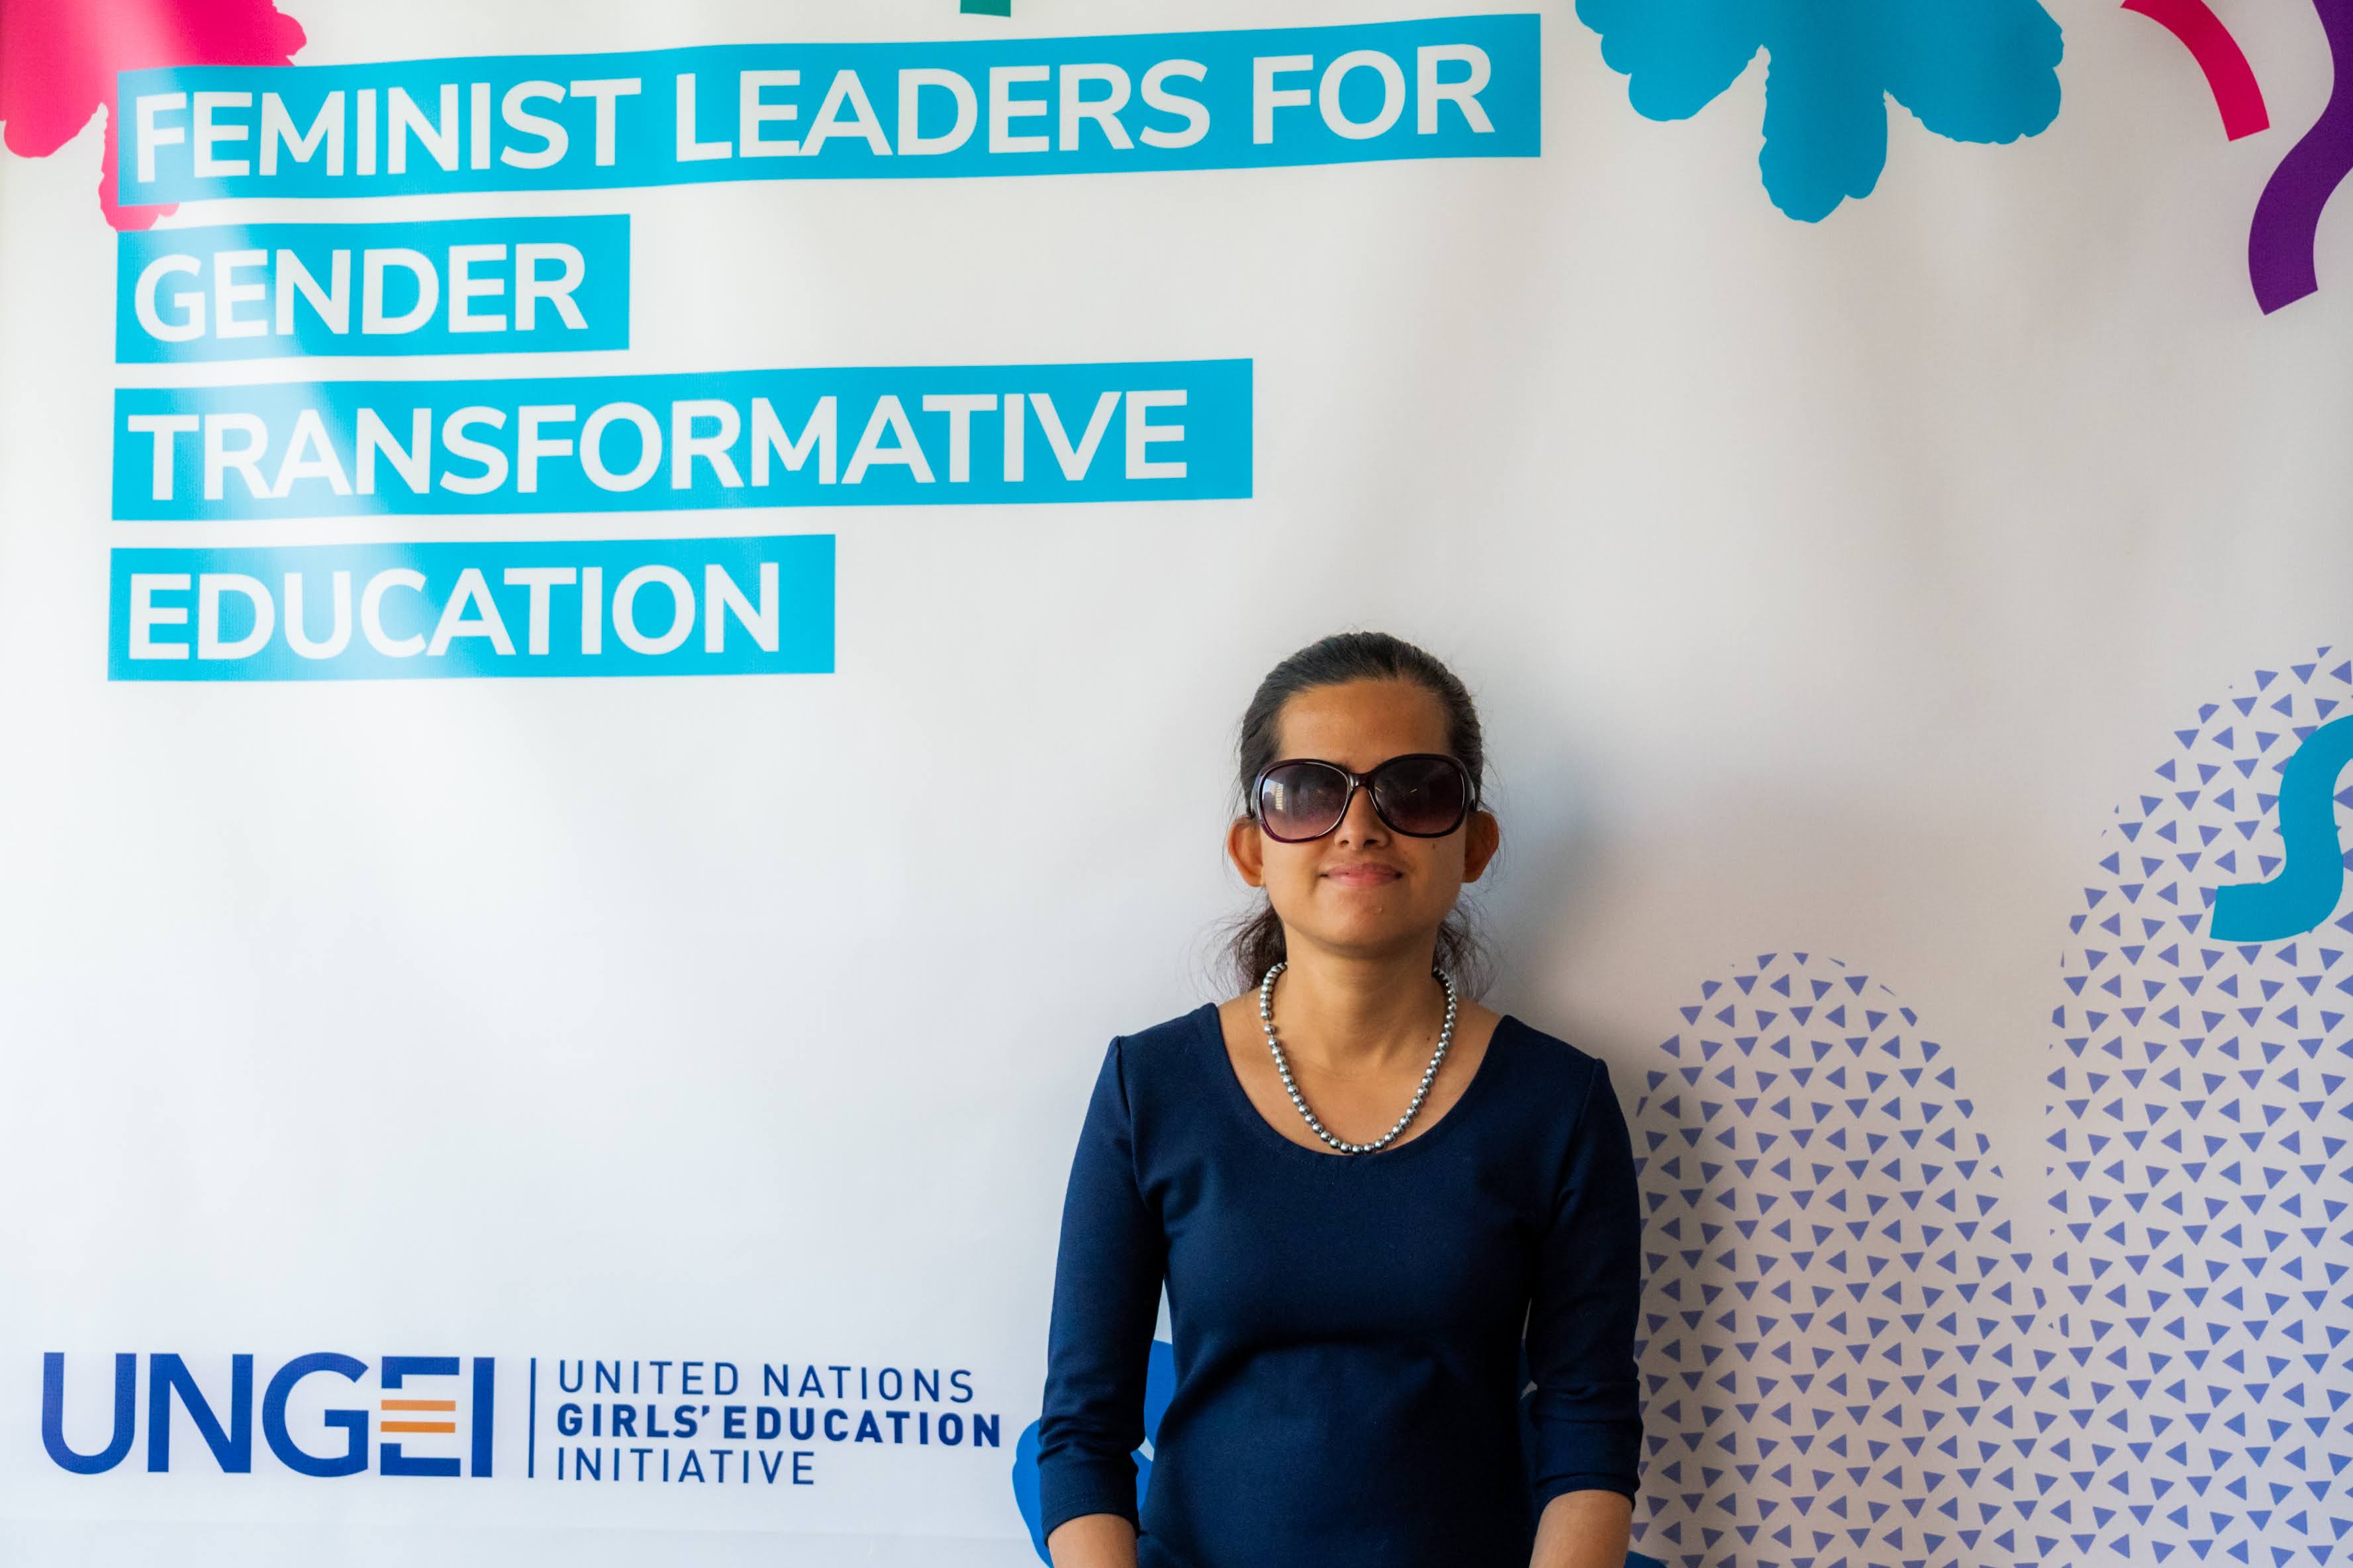 Laxmi in front of a backdrop that says Feminist Leaders for Gender Transformative Education